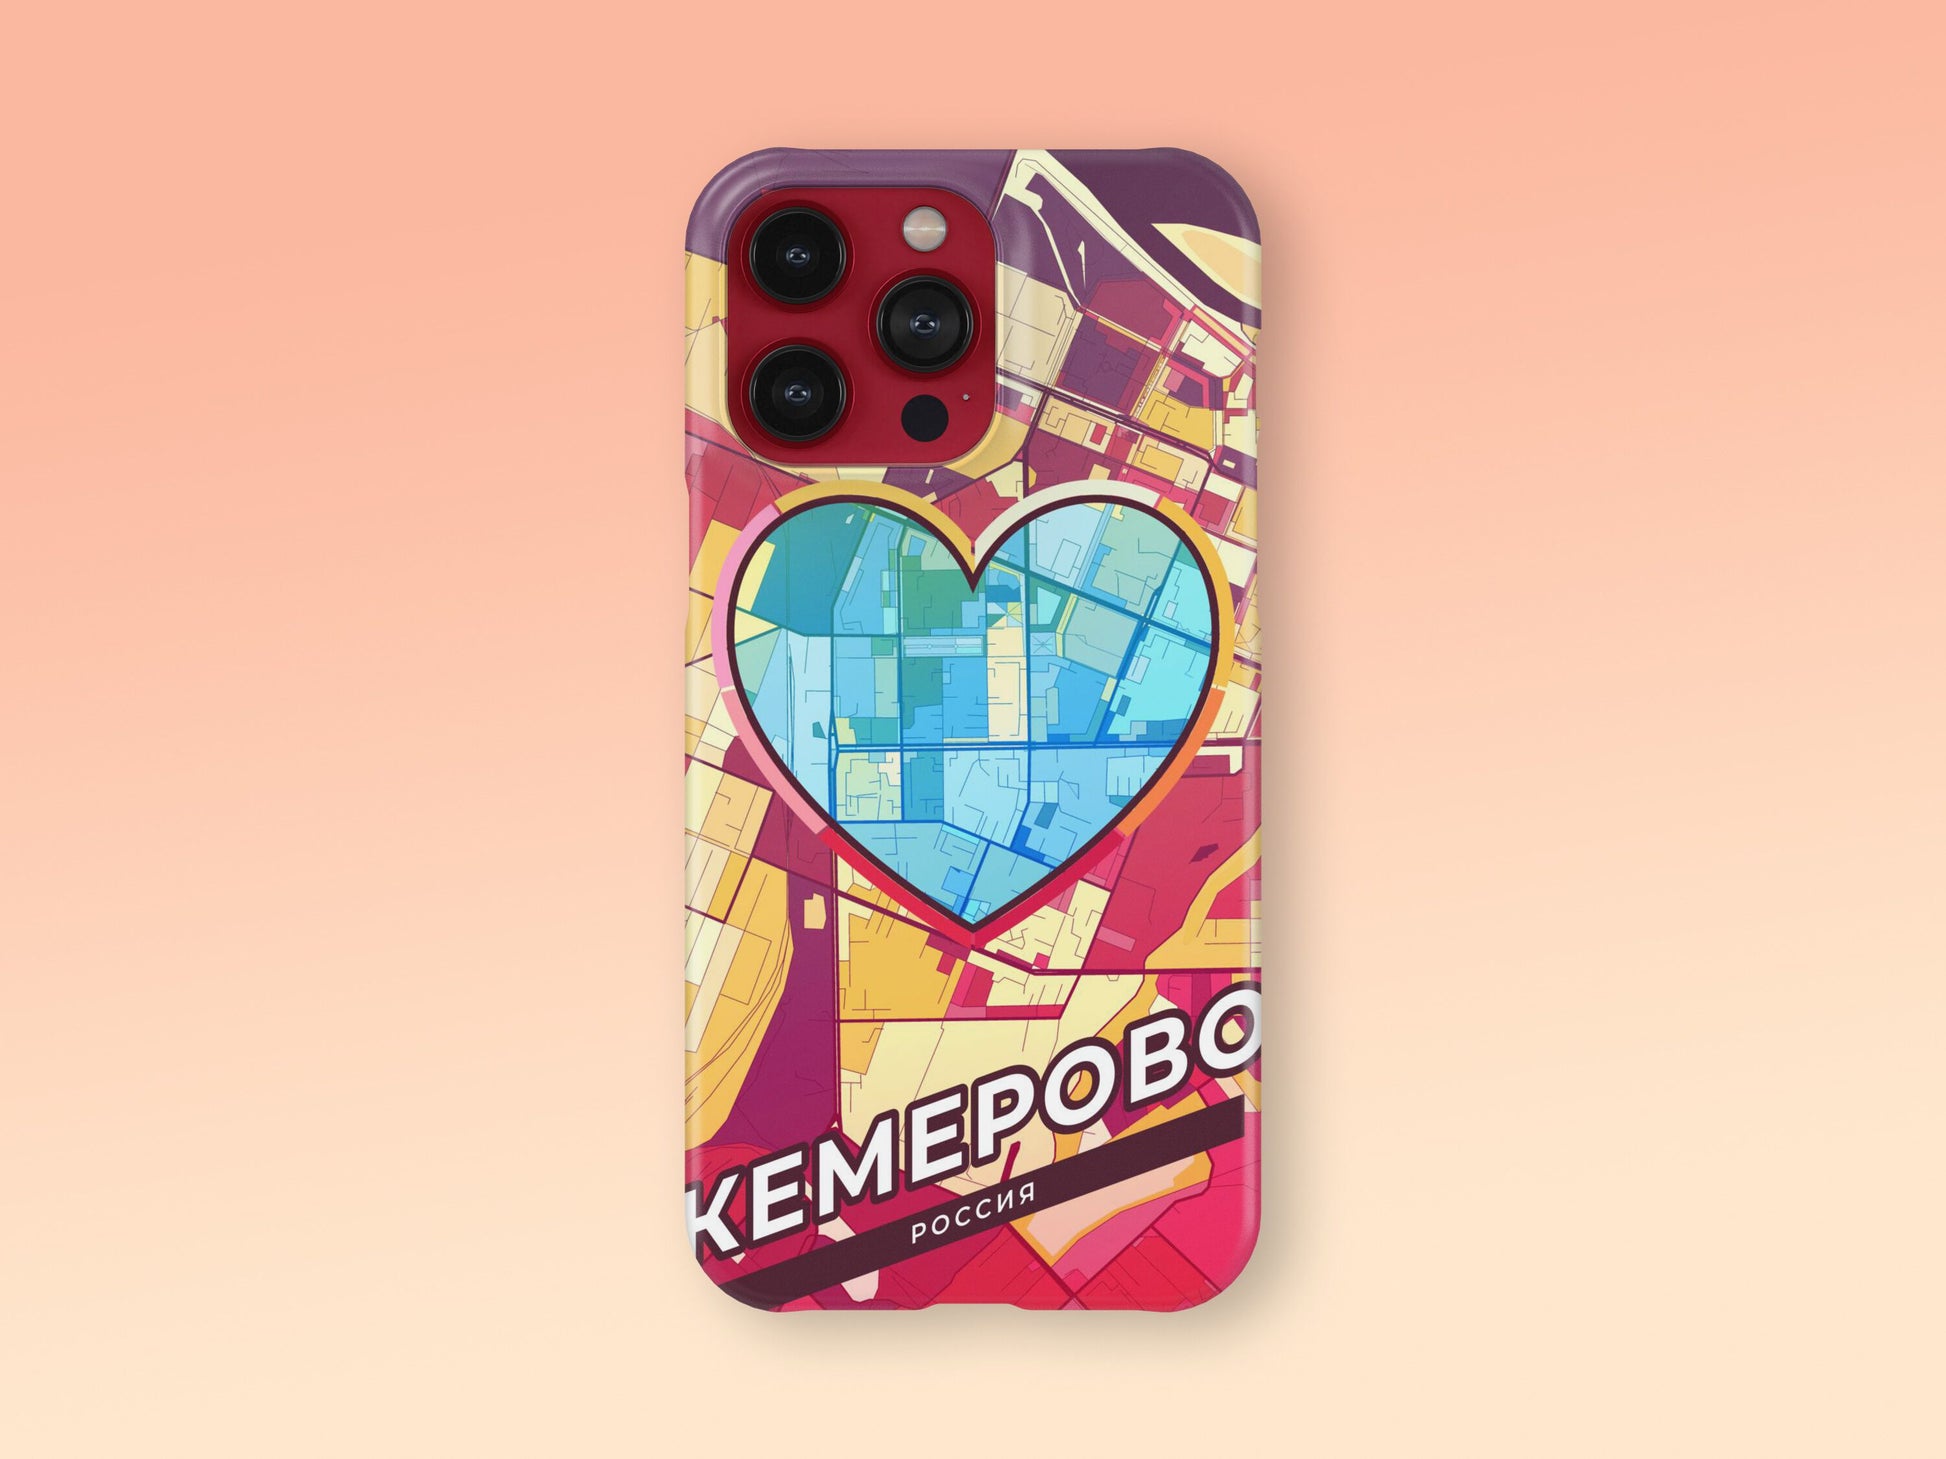 Kemerovo Russia slim phone case with colorful icon. Birthday, wedding or housewarming gift. Couple match cases. 2